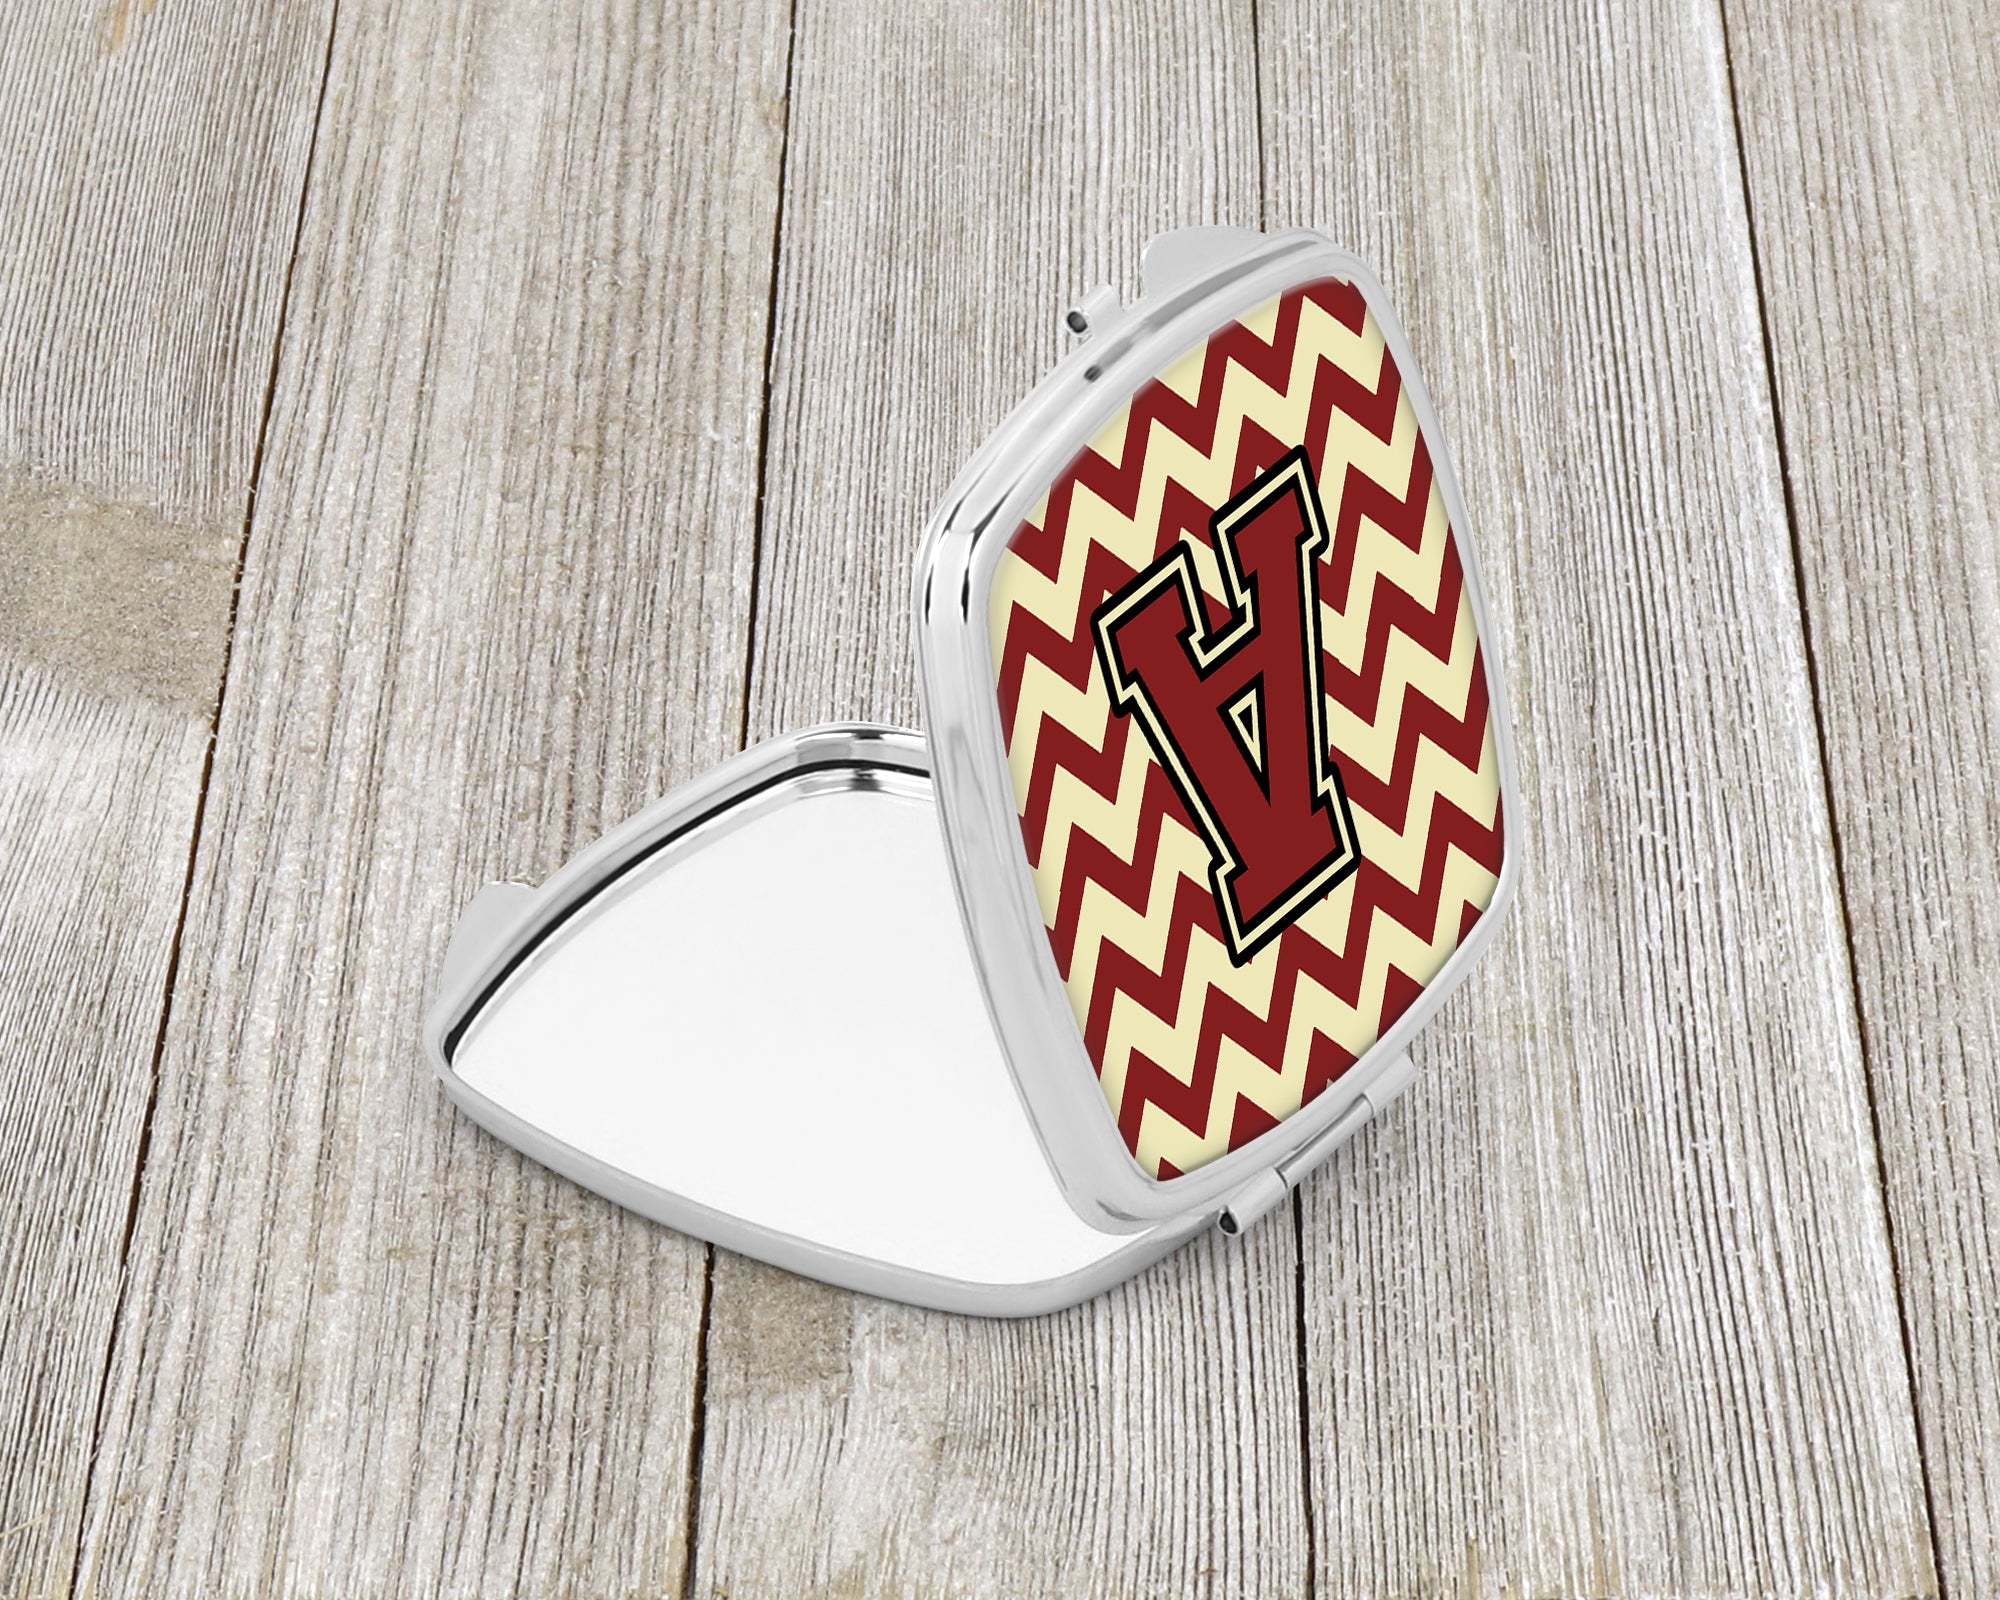 Letter A Chevron Maroon and Gold Compact Mirror CJ1061-ASCM